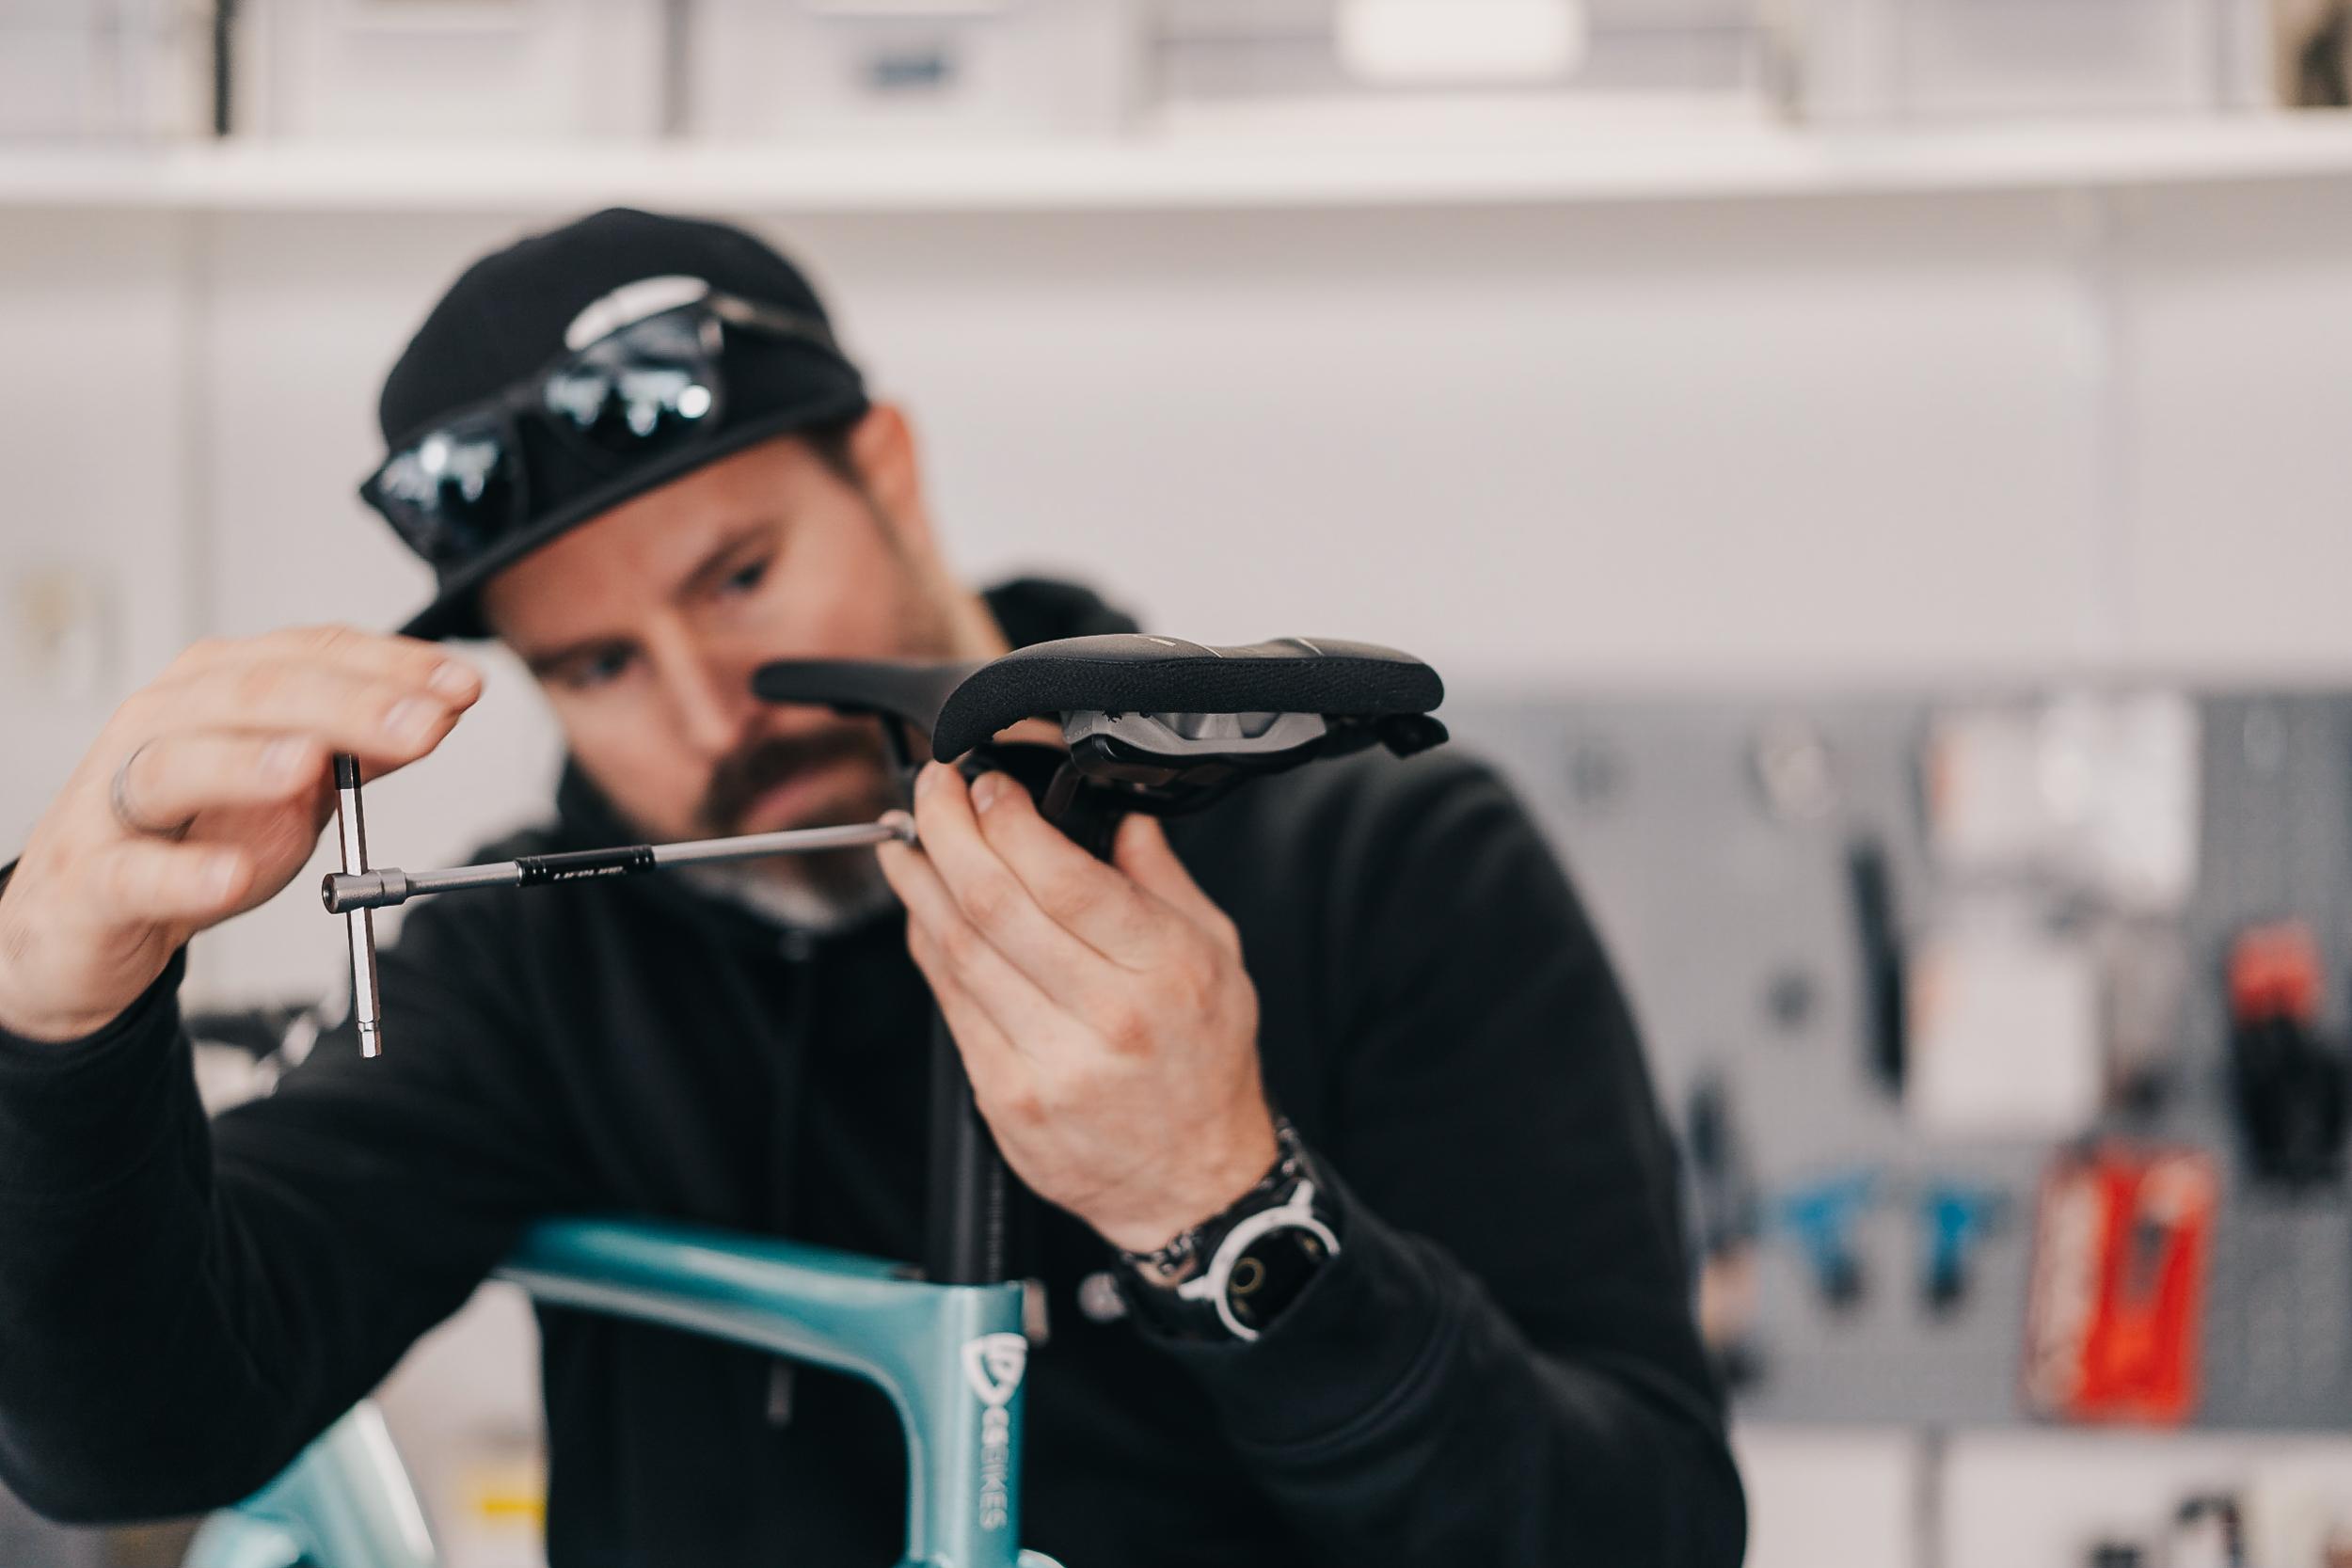 <p>With CS Bikes, you can experience the comfort and performance of SQ-Lab technology tailored specifically to you. Our Bike Tailoring process combines advanced measurements with our expertise to select the ideal products for your application. Say goodbye to discomfort and hello to enjoyable, pain-free rides.</p><p>Don't settle for anything less than perfection when it comes to your saddle. Choose CS Bikes and SQ-Lab technology to elevate your cycling experience. Get in touch with us now and discover the difference a perfectly fitted saddle can make. Your comfort is our priority, and we're here to exceed your expectations.</p>